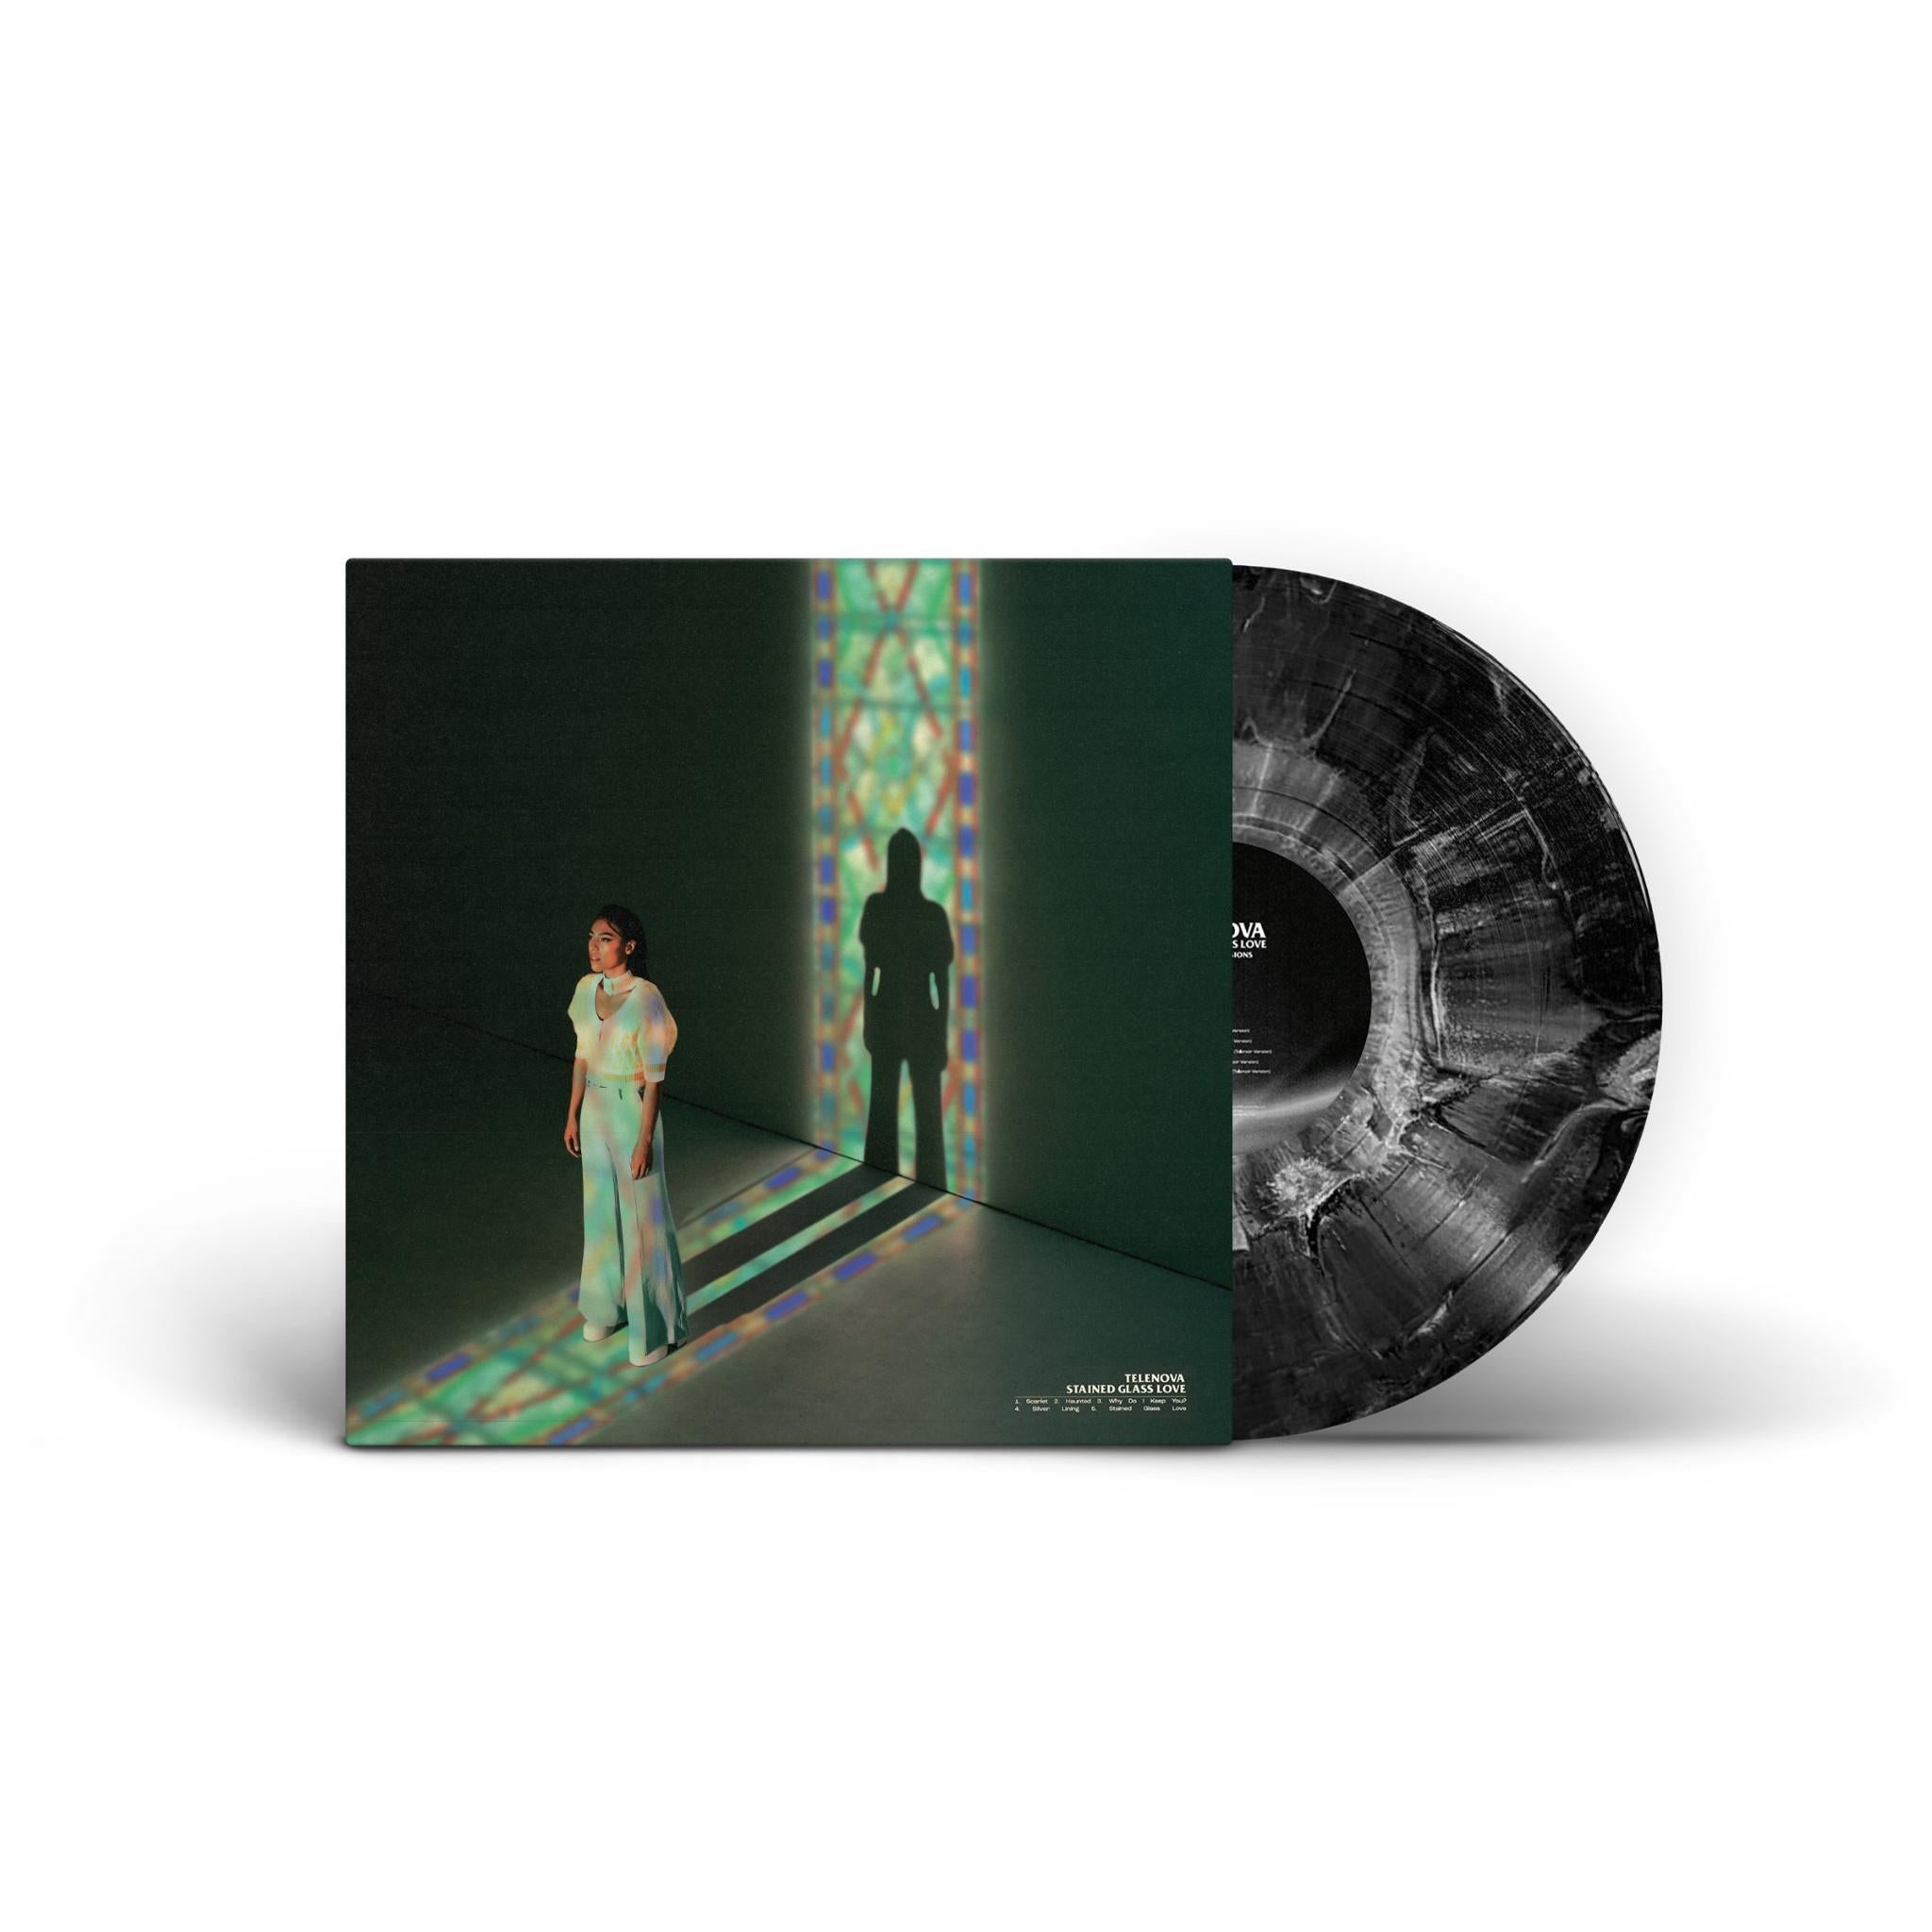 stained glass love (special edition) (black & white marbled vinyl)